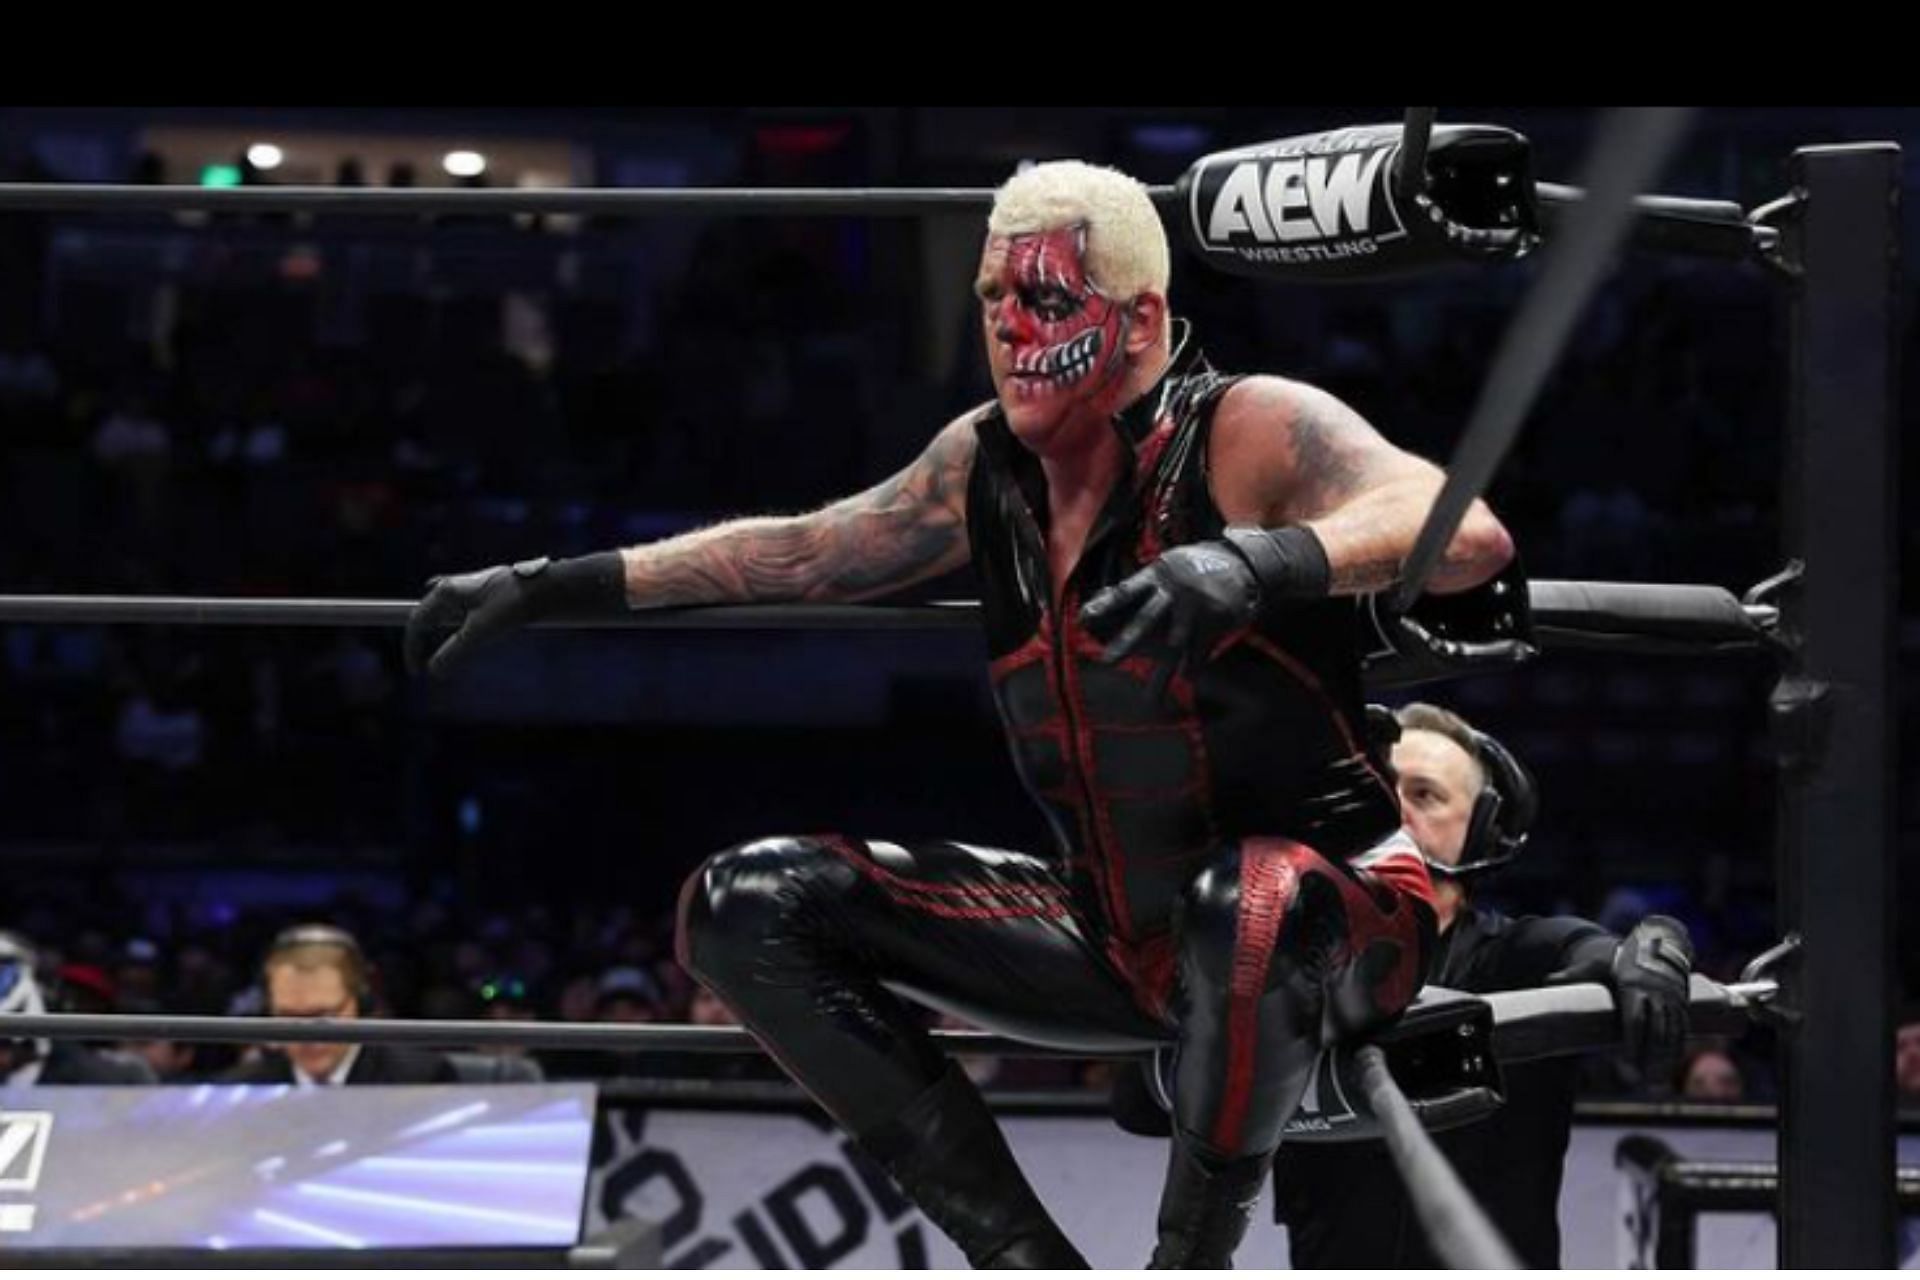 Dustin Rhodes is in the headlines once again [Image Credits: Dustin Rhodes Instagram]